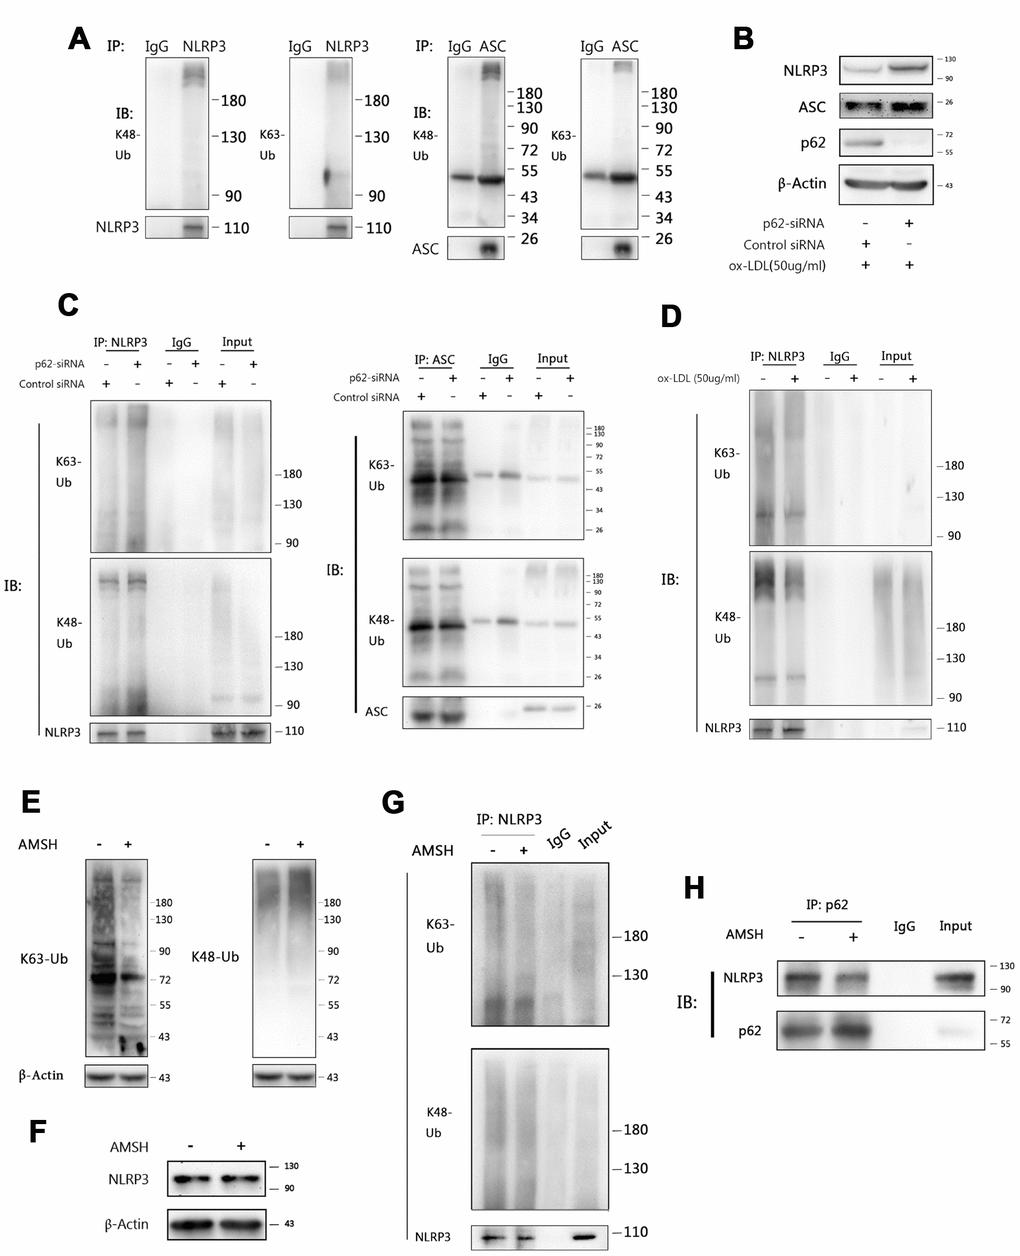 P62 binds to NLRP3 via the K63 polyubiquitin chains. (A) The immunoblot analysis of NLRP3 and ASC immunoprecipitates of Mφ stimulated with ox-LDLs (50 ug/ml) for 24 hours. (B) The immunoblot analysis of the total lysates of Mφ transfected with control siRNA or p62-siRNA for 24 hours, and subsequently stimulated with ox-LDLs (50 ug/ml) for another 24 hours. (C) The immunoblot analysis of NLRP3 (left) and ASC (right) immunoprecipitates of Mφ treated as described in (B). (D) The immunoblot analysis of NLRP3 immunoprecipitates of Mφ treated with or without ox-LDL (50 ug/ml) for 24 hours. (E) The detection for K63 (left) and K48 (right) polyubiquitin chains in the total foam-cell lysates pretreated with or without AMSH by immunoblotting. Prior to immunoblotting, 50 ul of ox-LDL stimulated Mφ lysates were administered with or without 1 ul of AMSH (AMSH concentration: 500 nM), and incubated at 37°C for 30 minutes. (F) The immunoblot analysis of NLRP3 and β-Actin in the total foam-cell lysates pretreated with or without AMSH (500 nM), as described in (E). (G) The NLRP3 immunoprecipitates obtained from ox-LDL stimulated Mφ lysates were treated with or without AMSH (500 nM), as described in (E), and subsequently subjected to immunoblotting. (H) The p62 immunoprecipitates obtained from foam-cell lysates were treated with or without AMSH (500 nM), as described in (E), and subsequently subjected to immunoblotting. All experiments were independently repeated for at least three times.